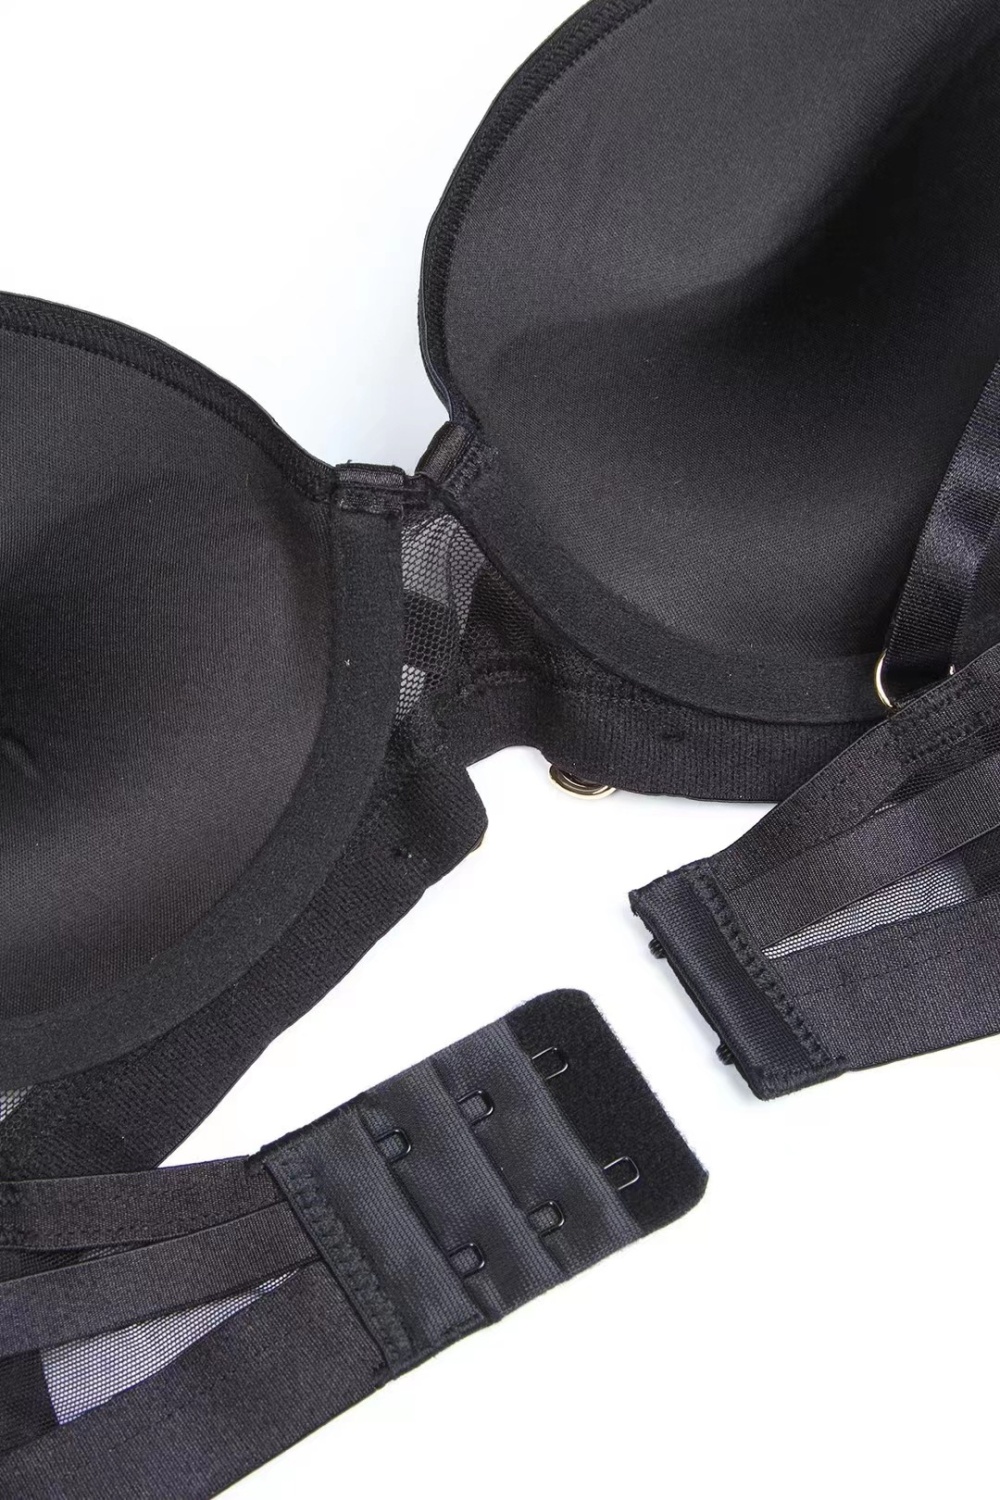 Steel care Bra small chest sexy Lingerie a set for women